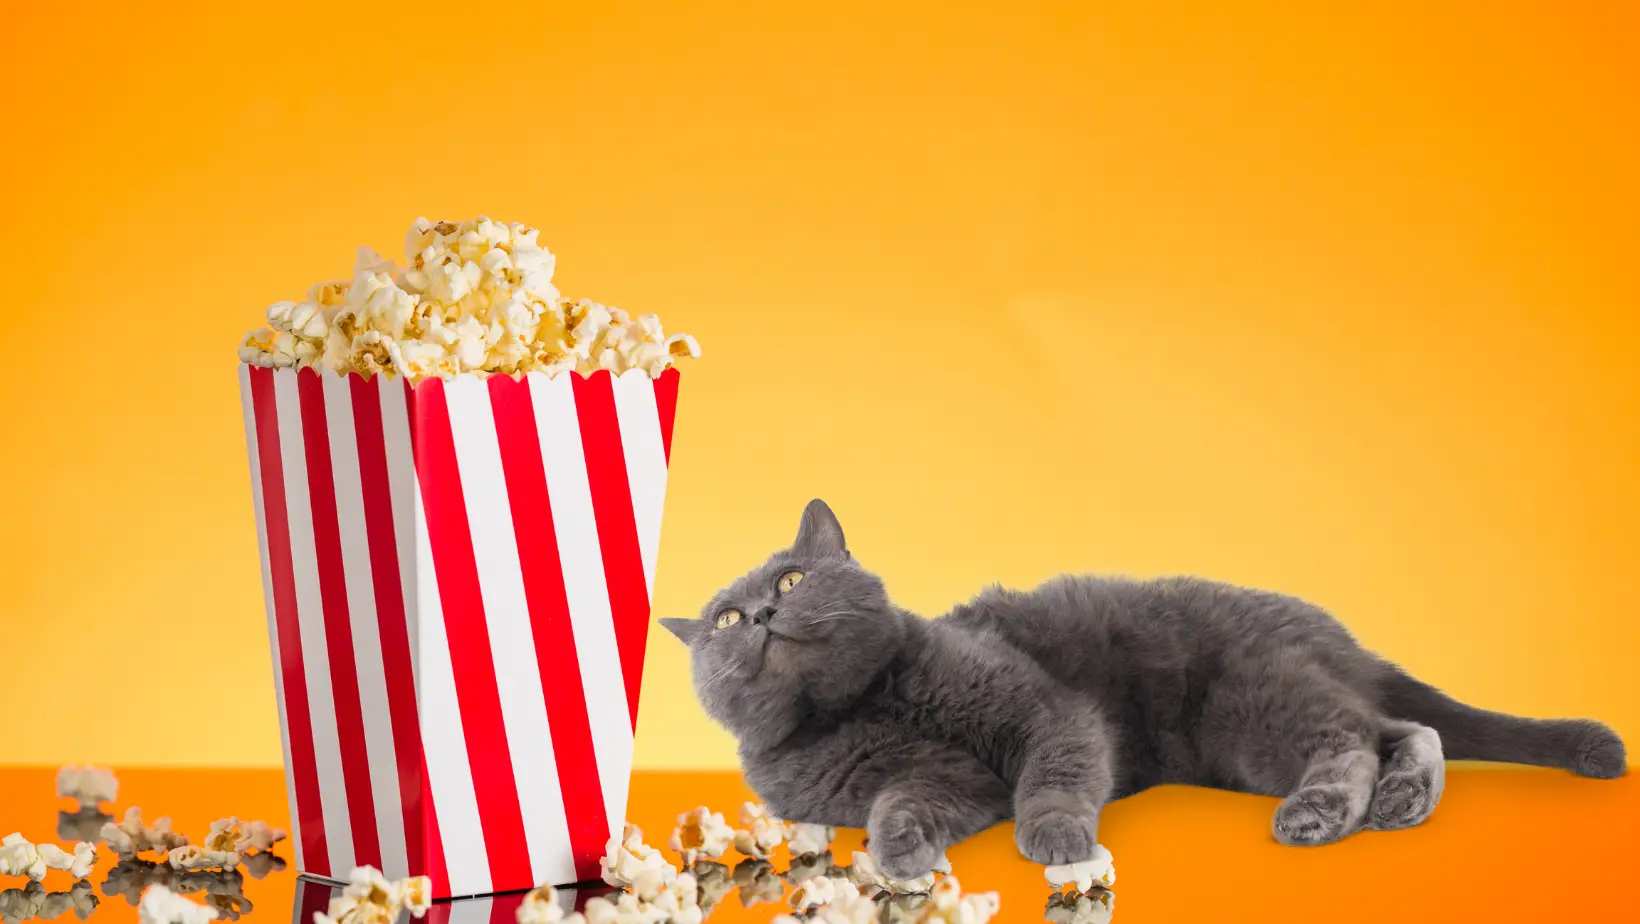 Can Cats Eat Popcorn?